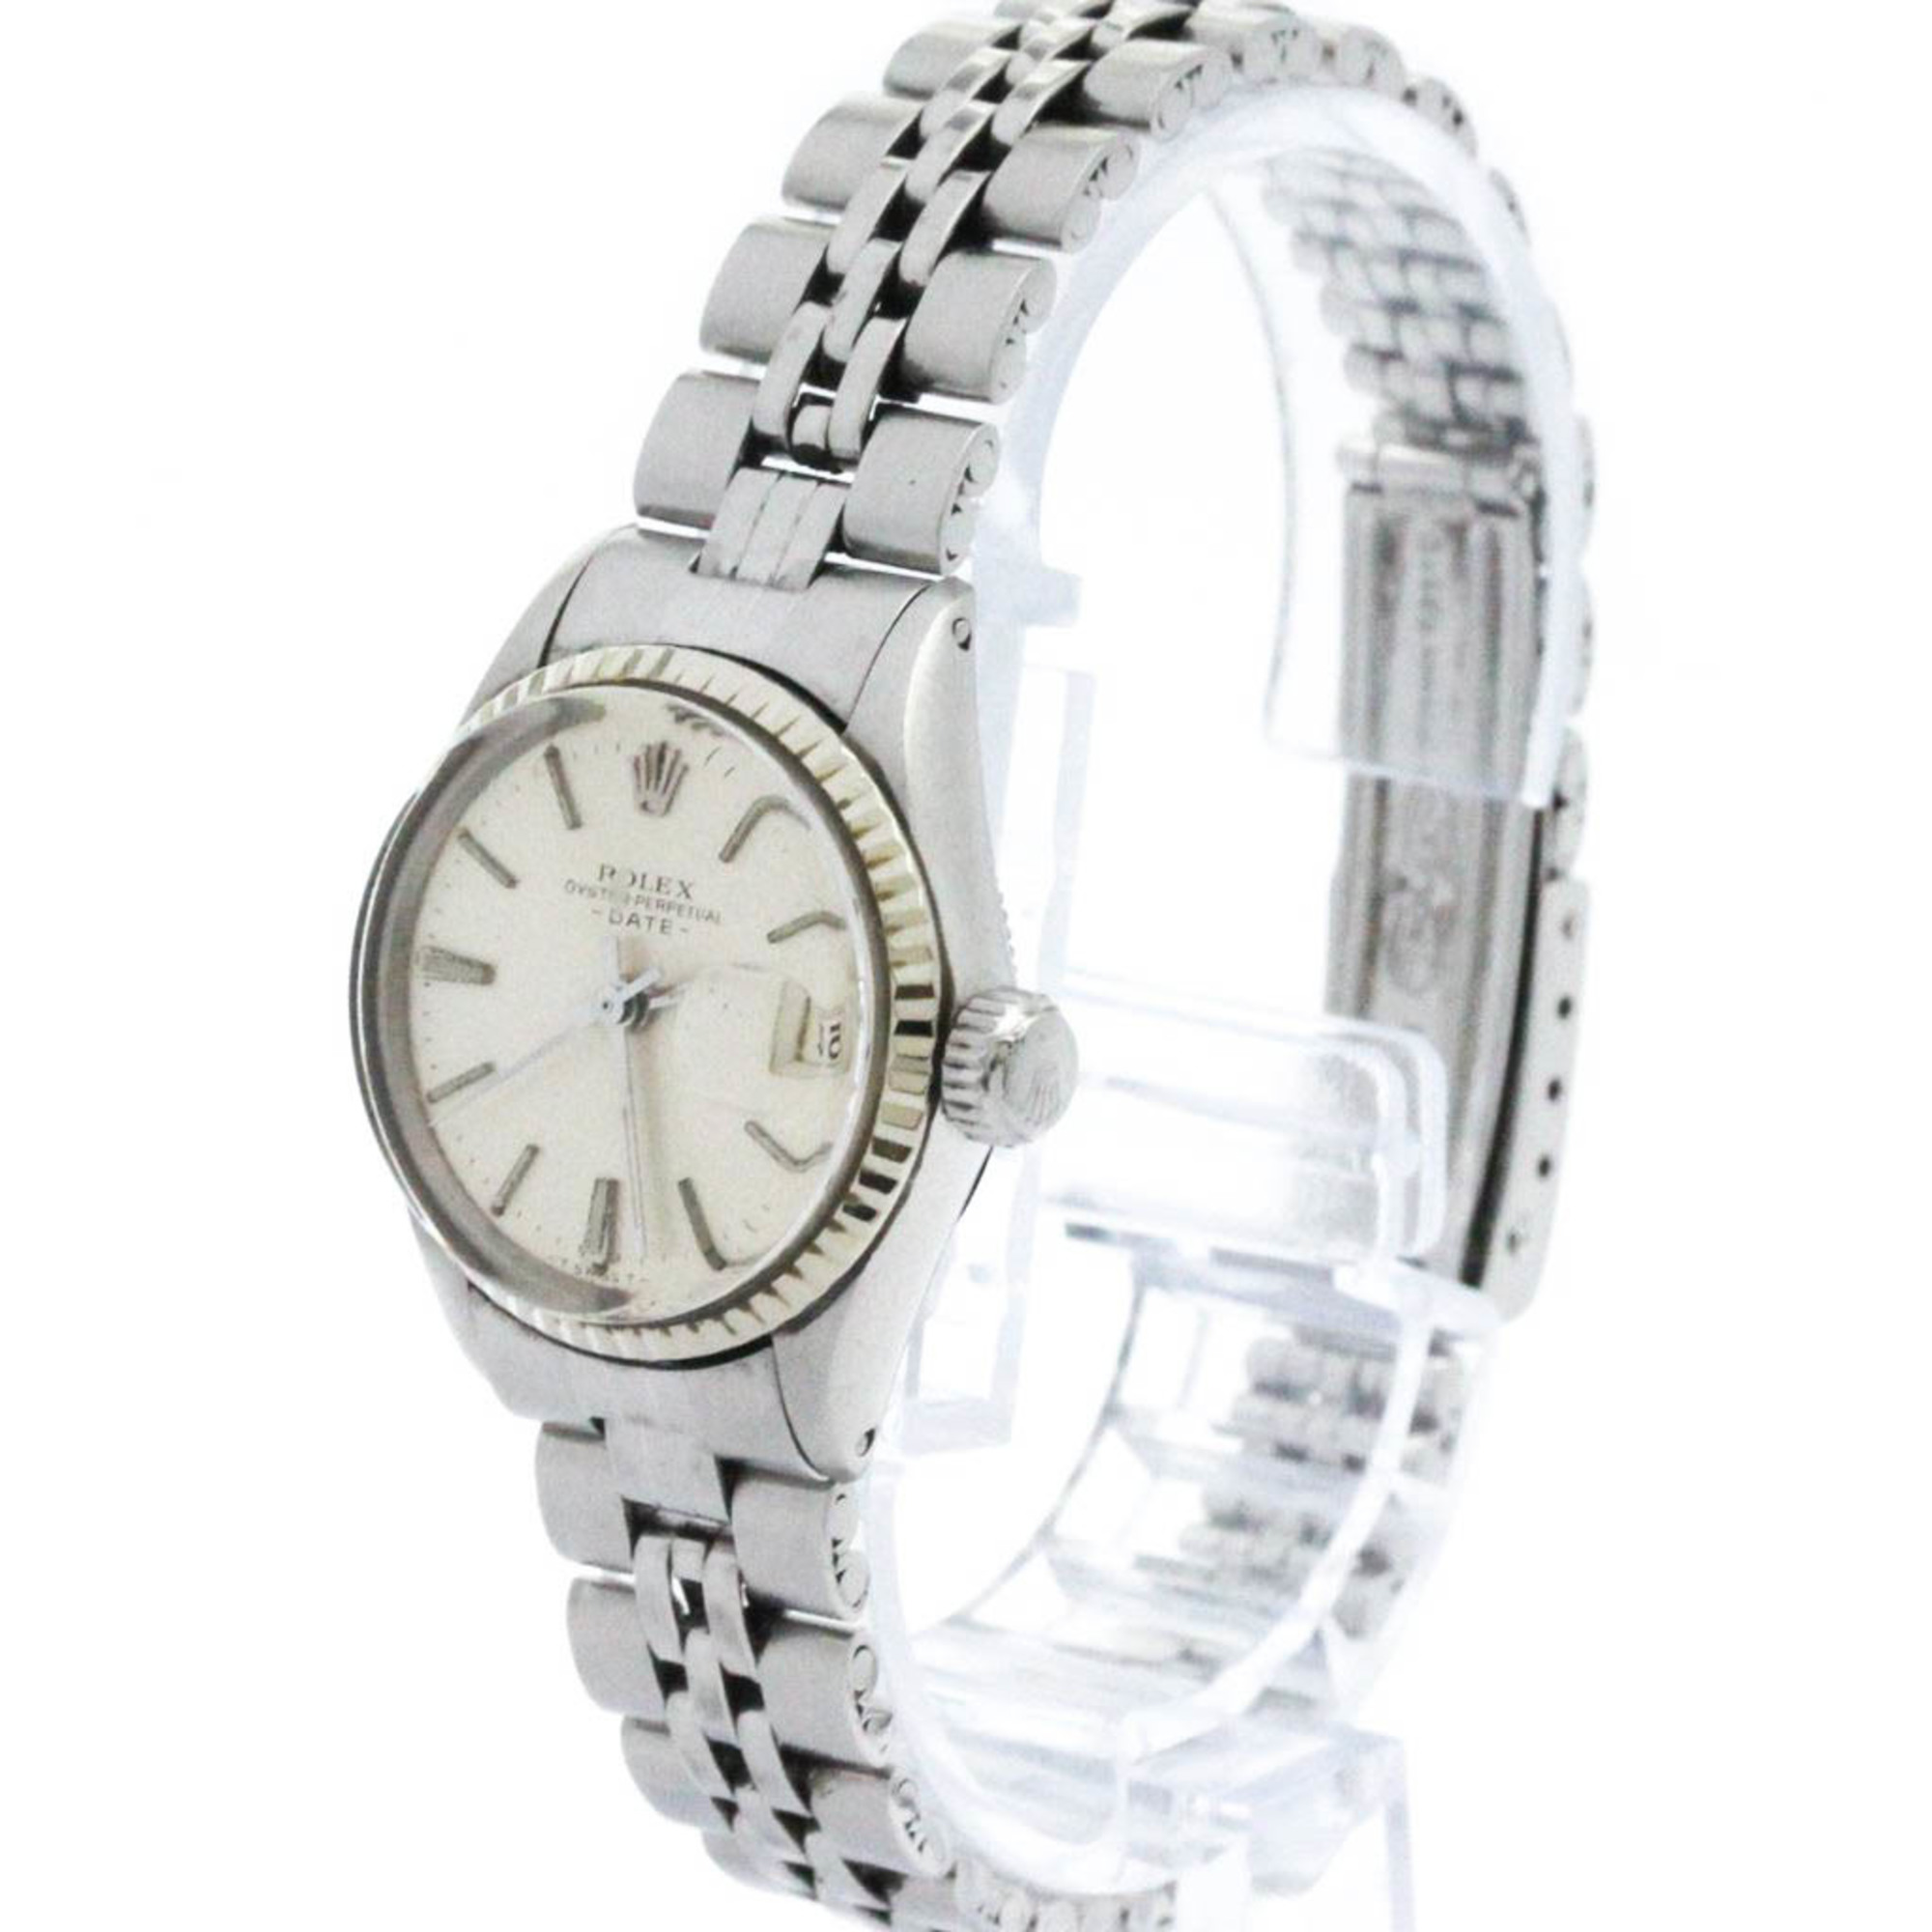 Vintage ROLEX Oyster Perpetual Date 6517 White Gold Steel Ladies Watch BF570554